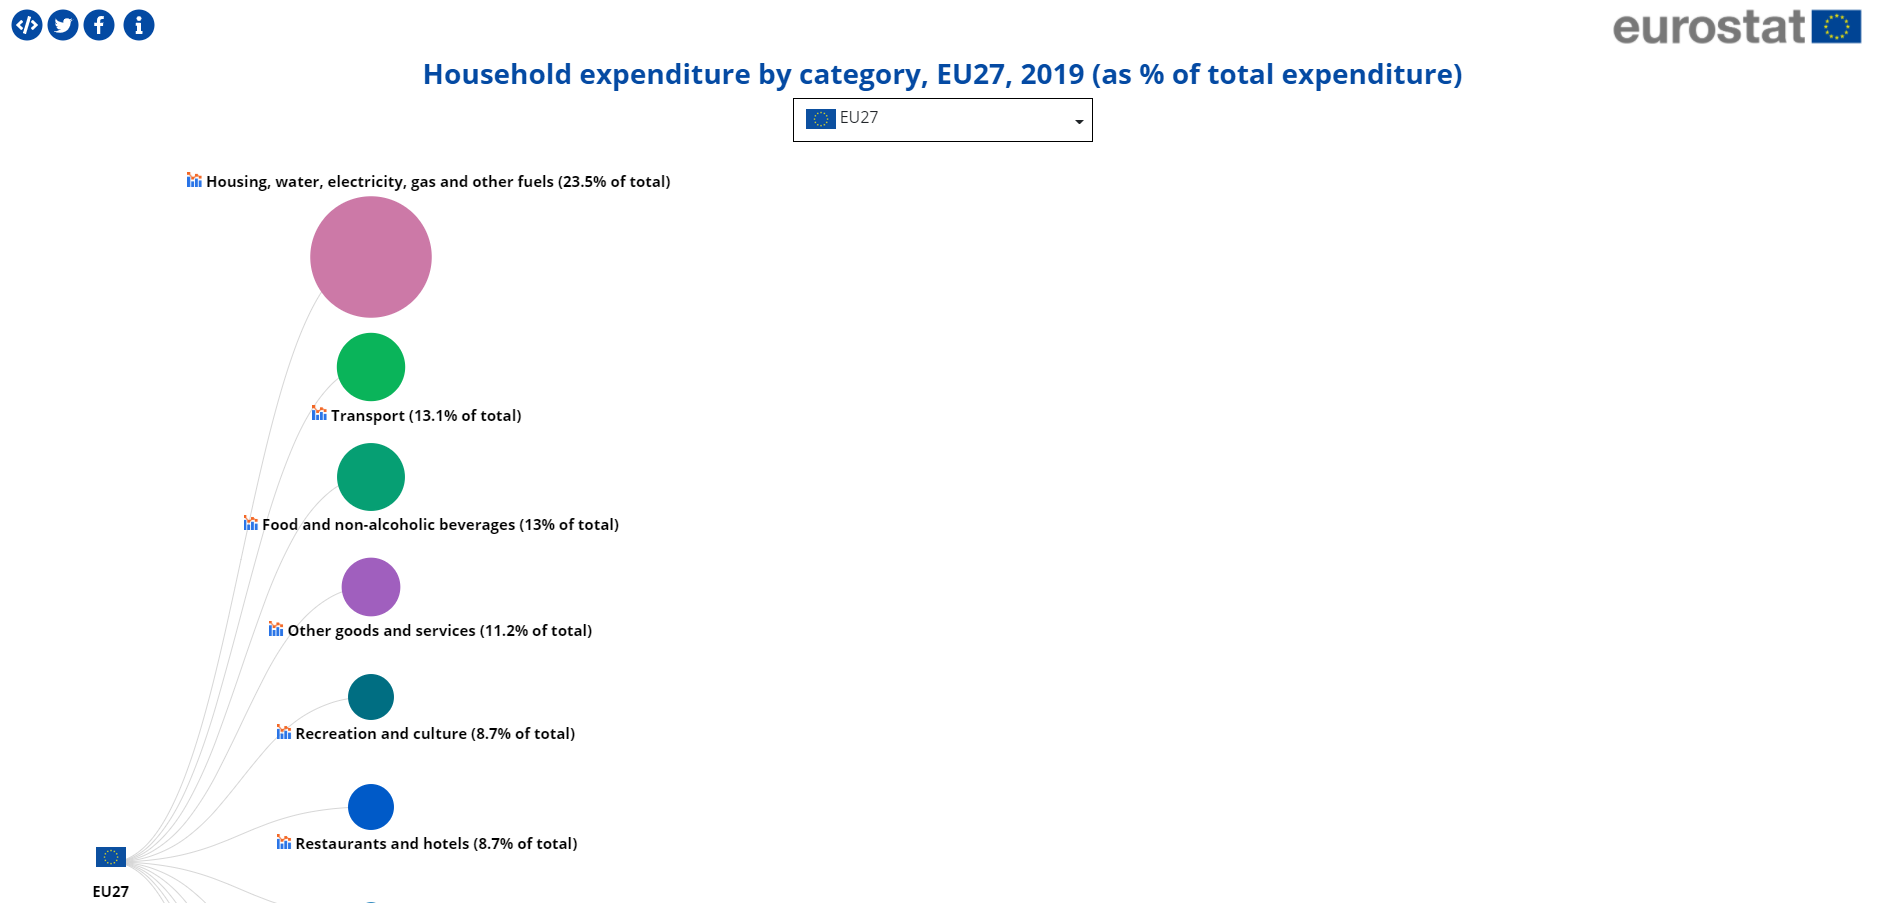 Visualisation tool on household expenditure by consumption purpose in the EU, 2019